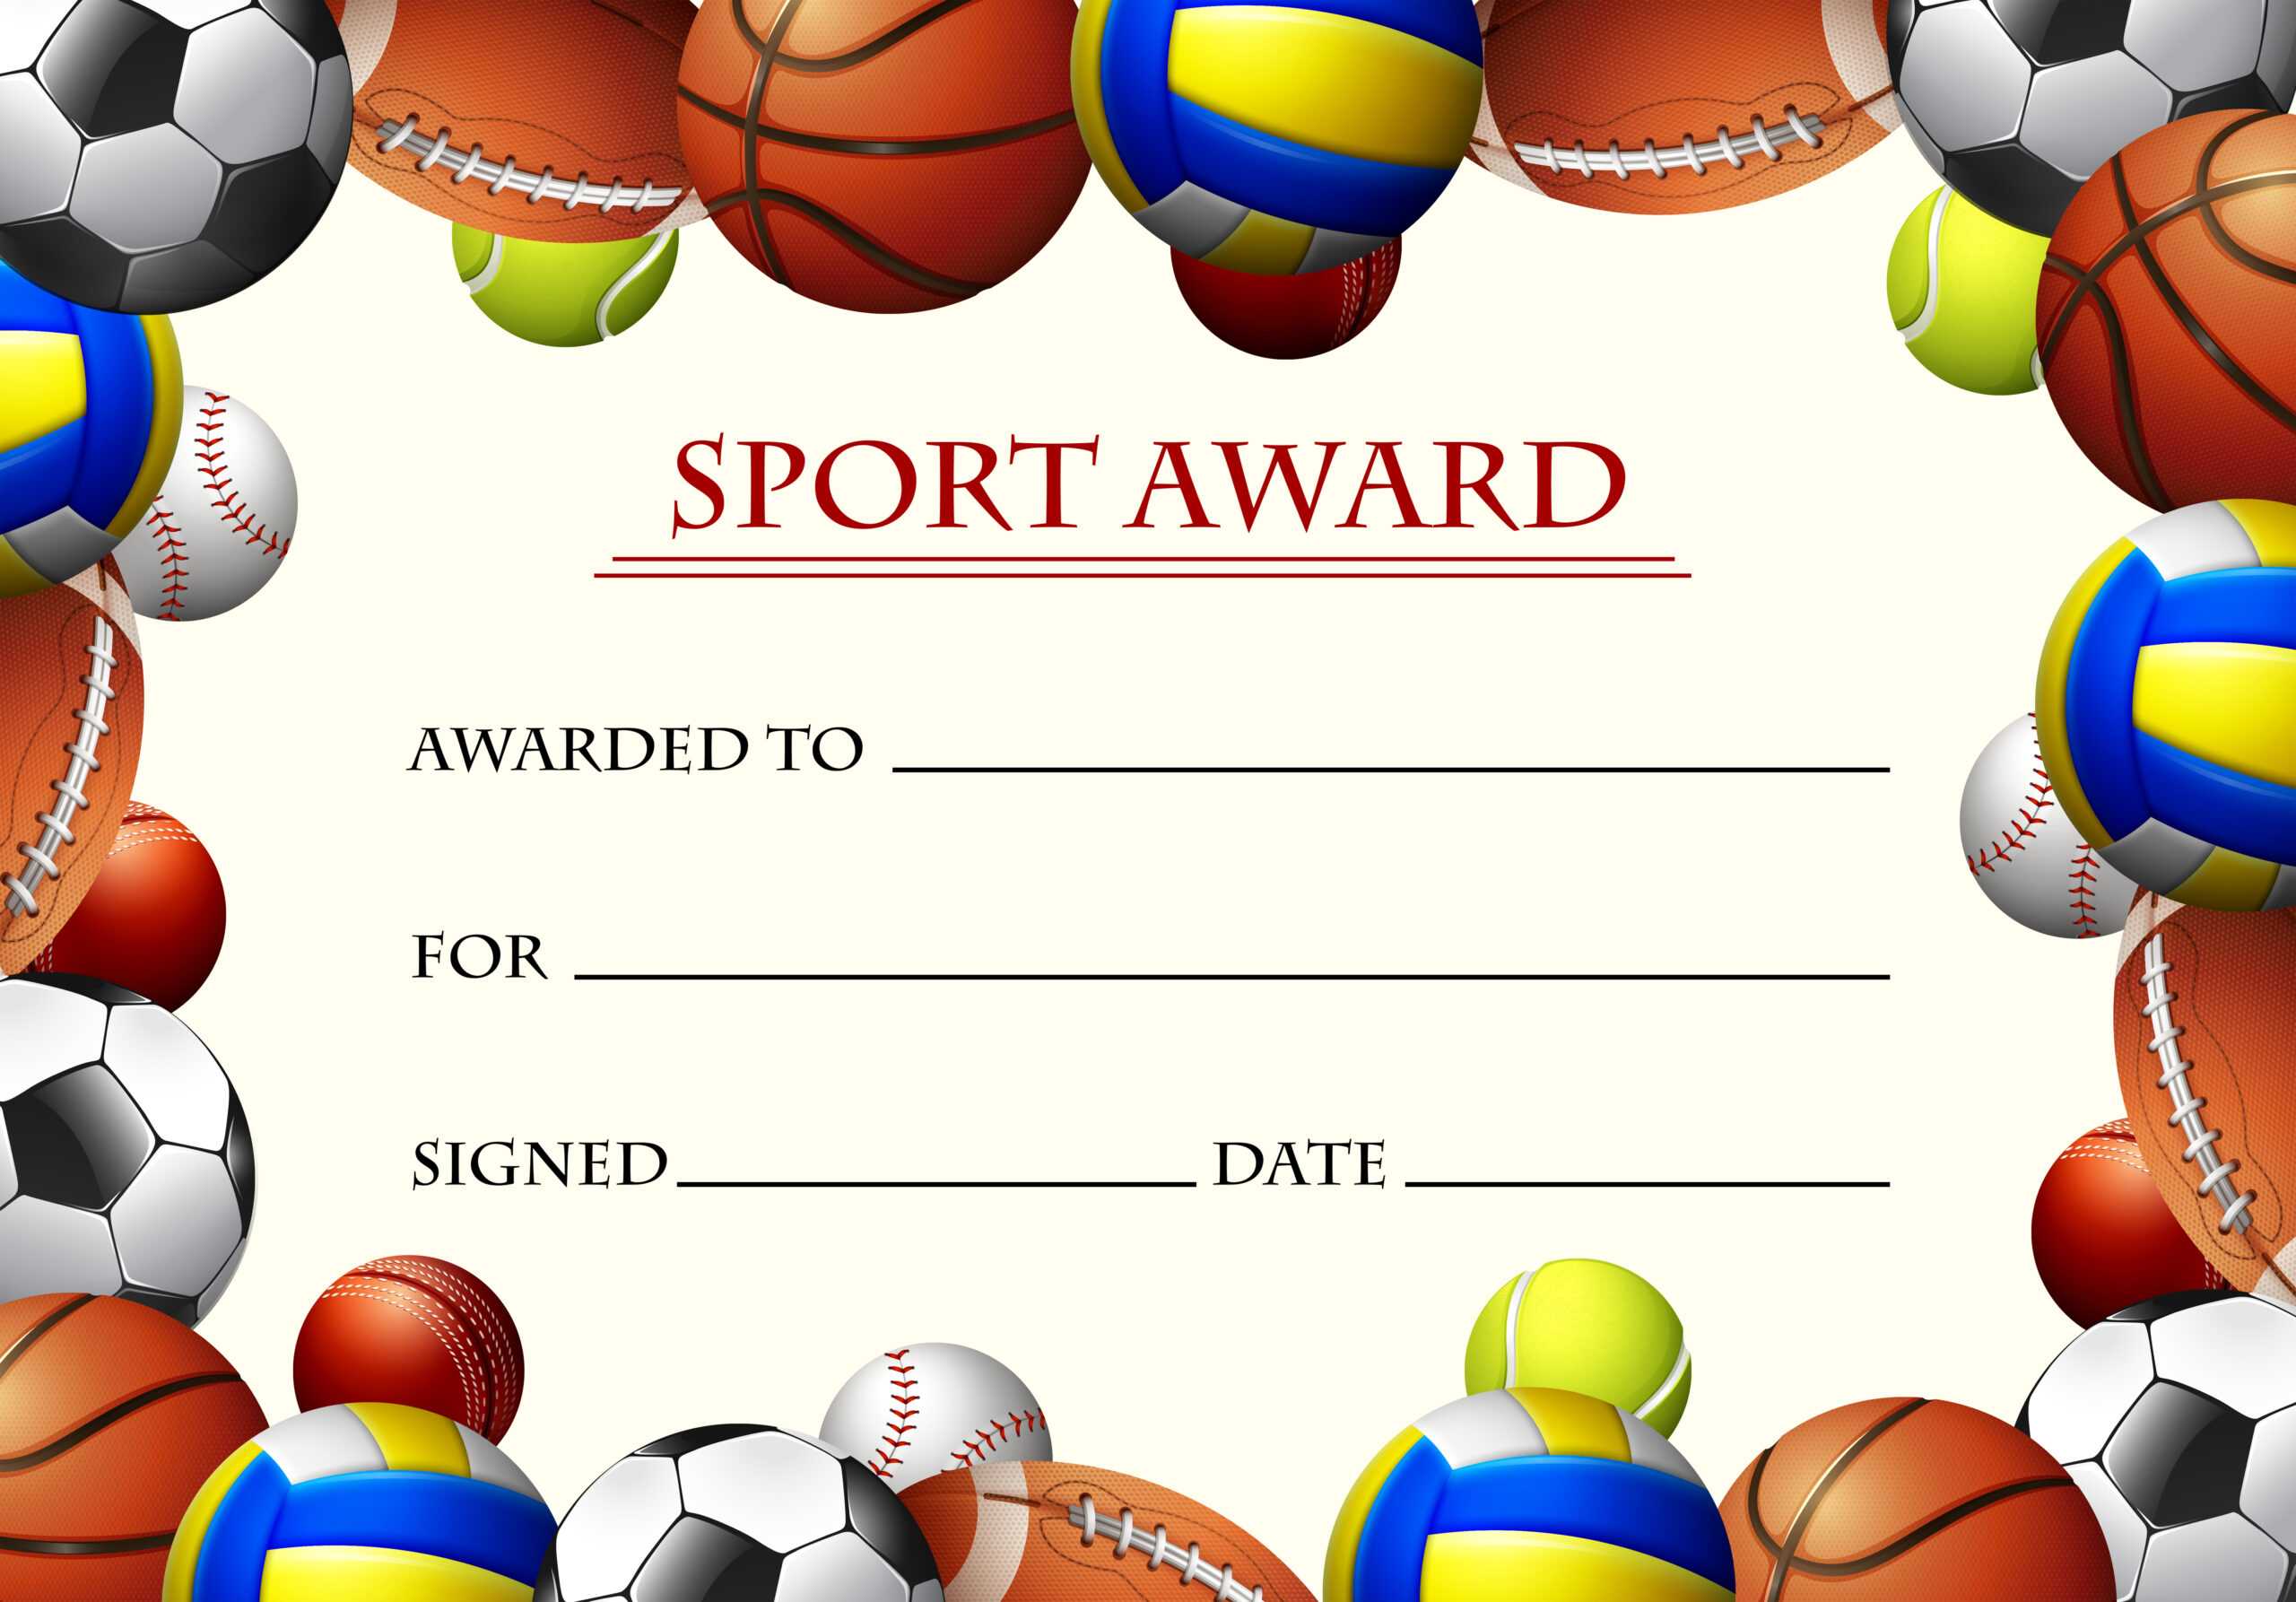 Certificate Template For Sport Award – Download Free Vectors Within Soccer Award Certificate Templates Free